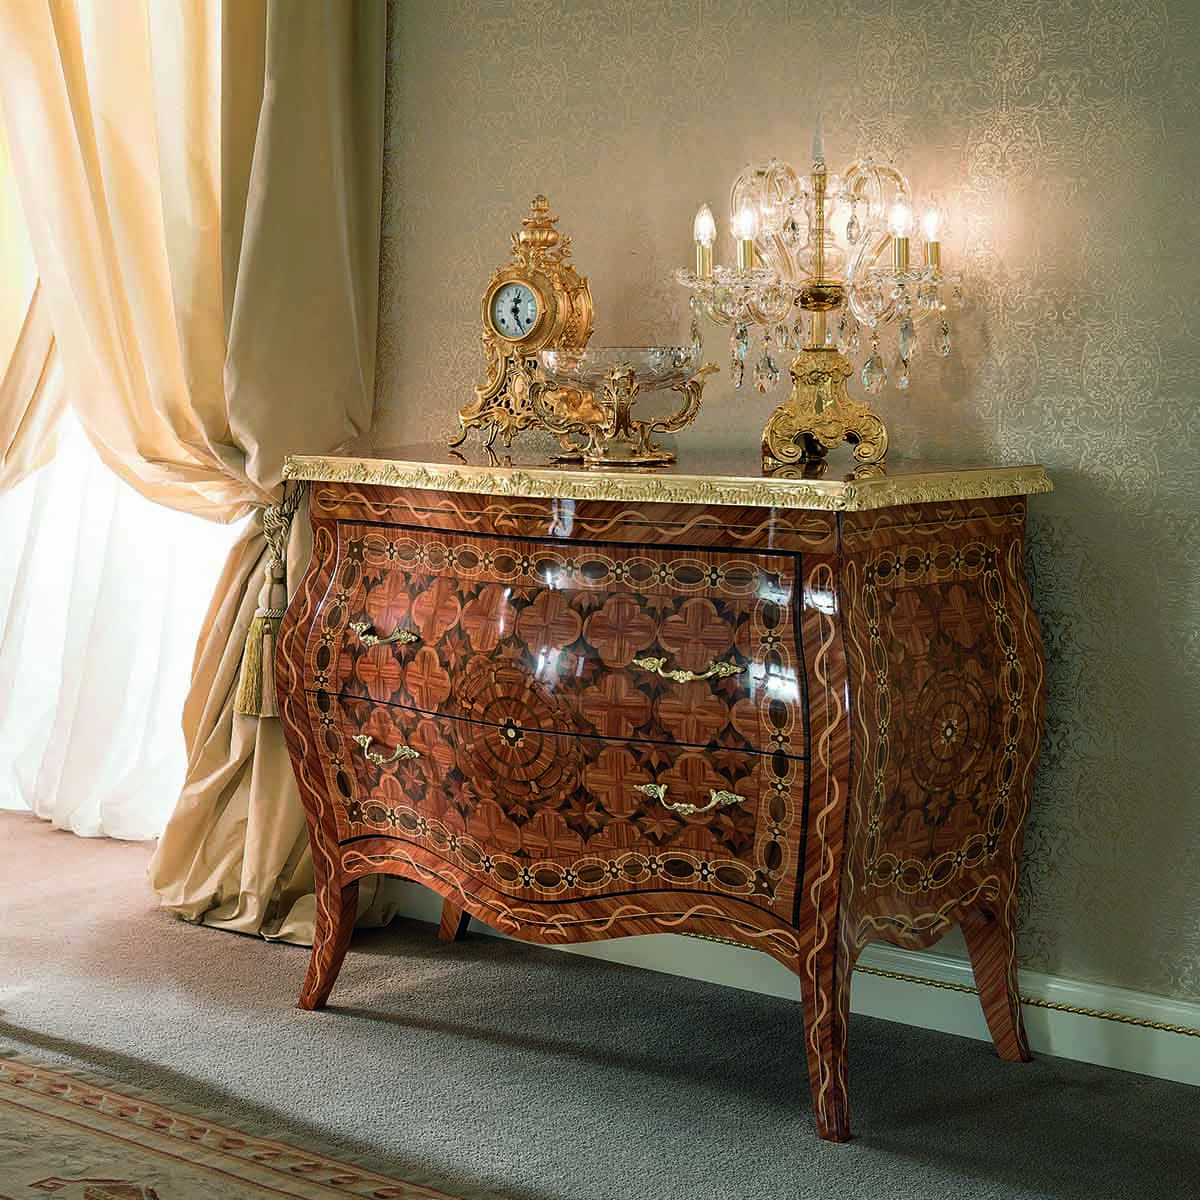 classic Italian luxury furniture - traditional handmade solid wooden ...